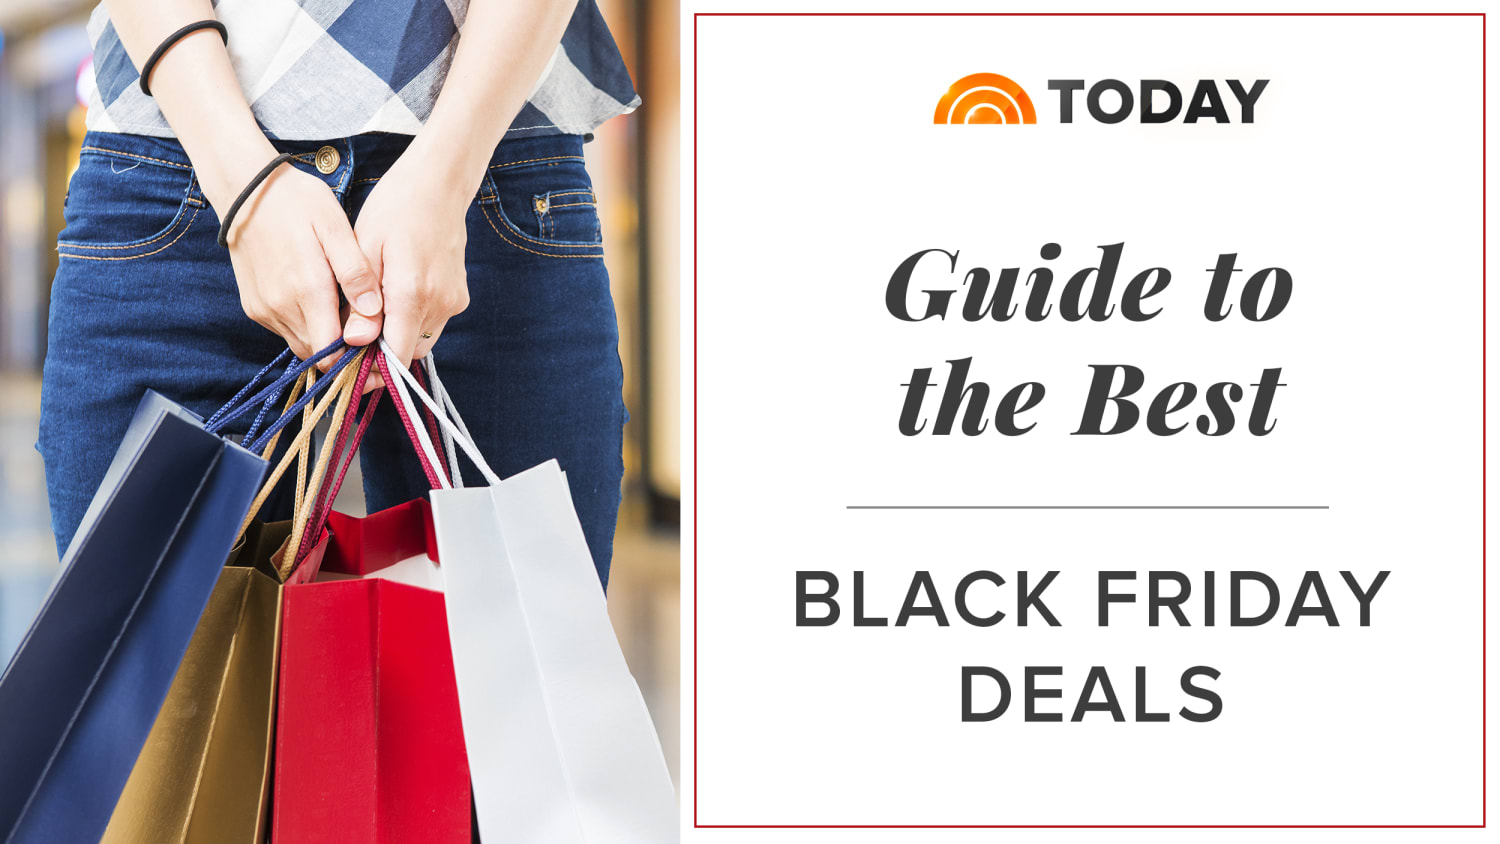 Best Black Friday Deals on Amazon, Target and more 2017 - TODAY.com - How To Search For Black Friday Deals